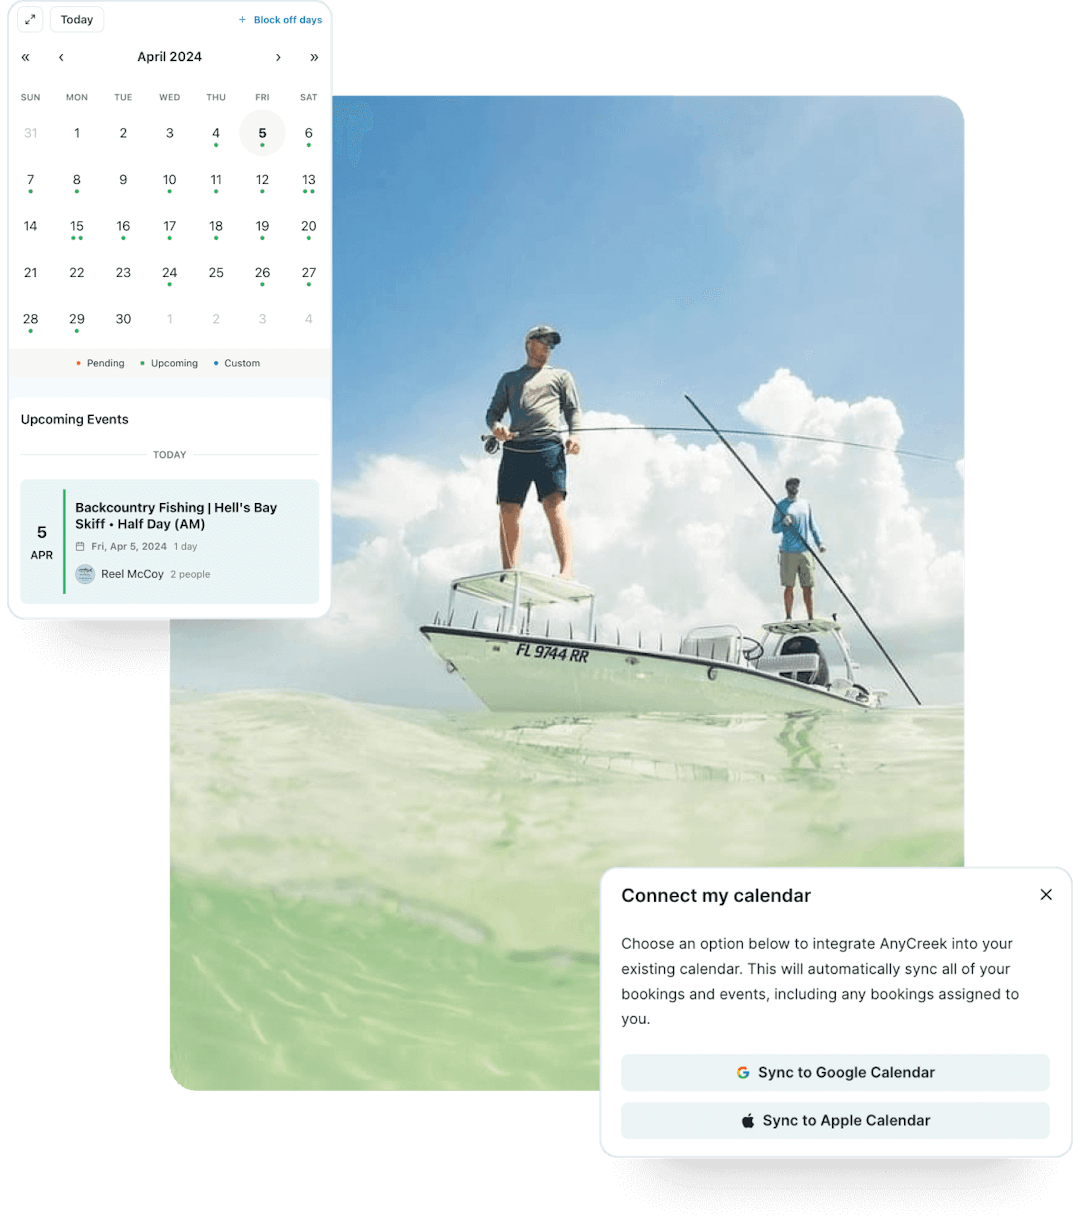 A collage featuring 2 anglers on a skiff, the AnyCreek calendar widget, and the Connect my calendar modal